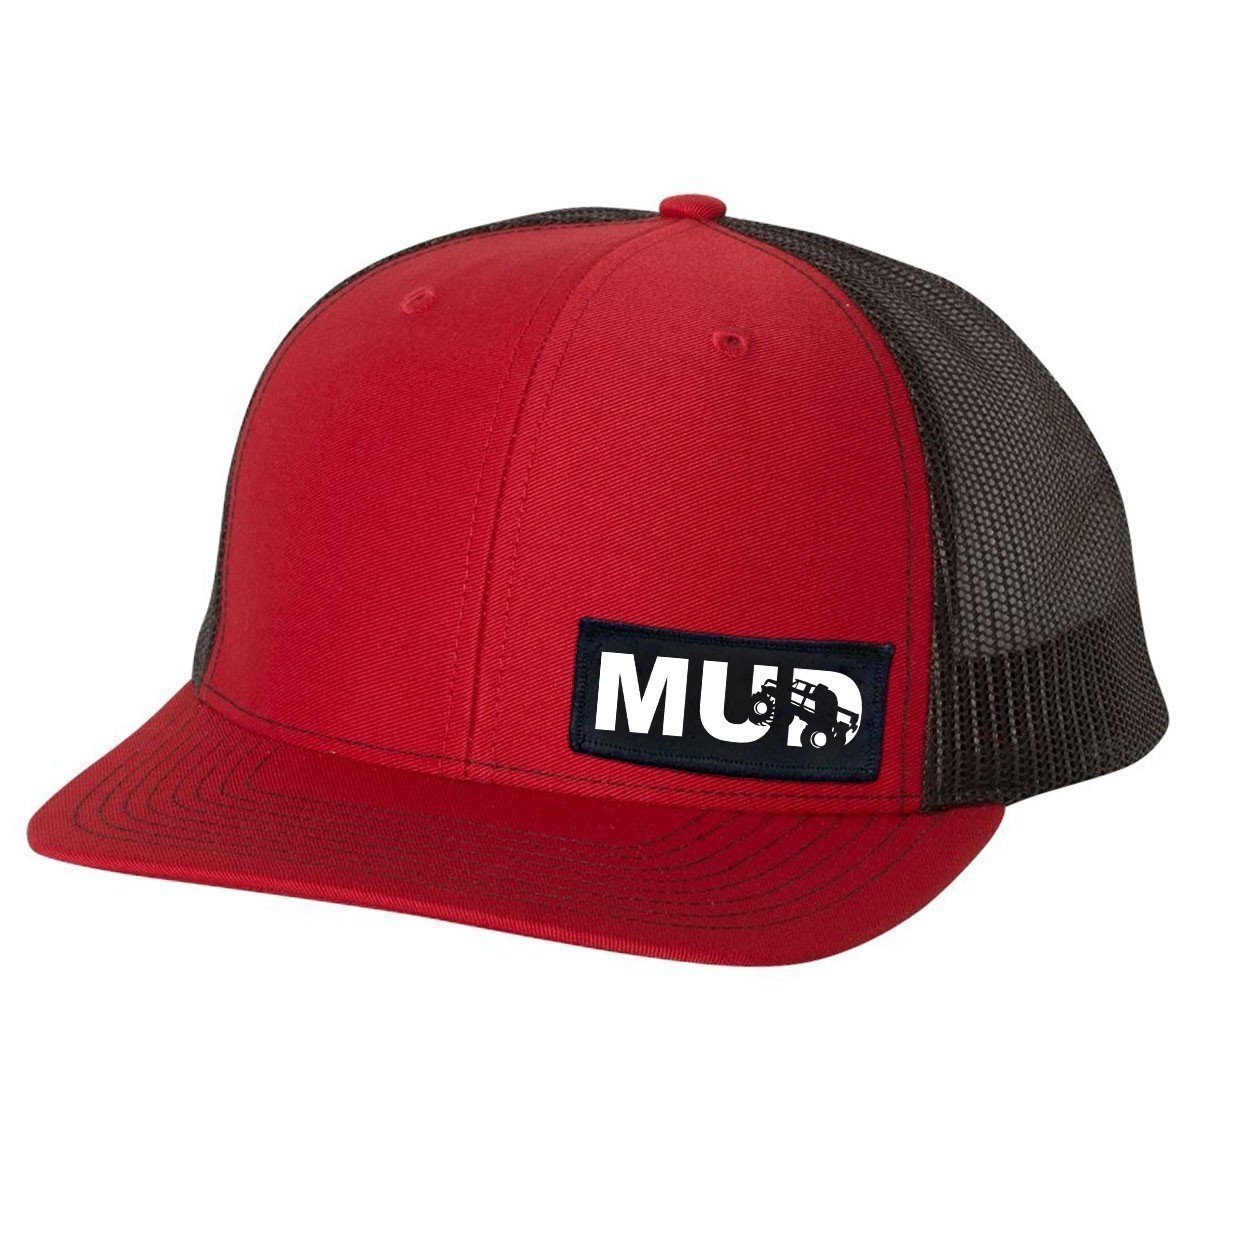 Mud Truck Logo Night Out Woven Patch Snapback Trucker Hat Red/Black (White Logo)